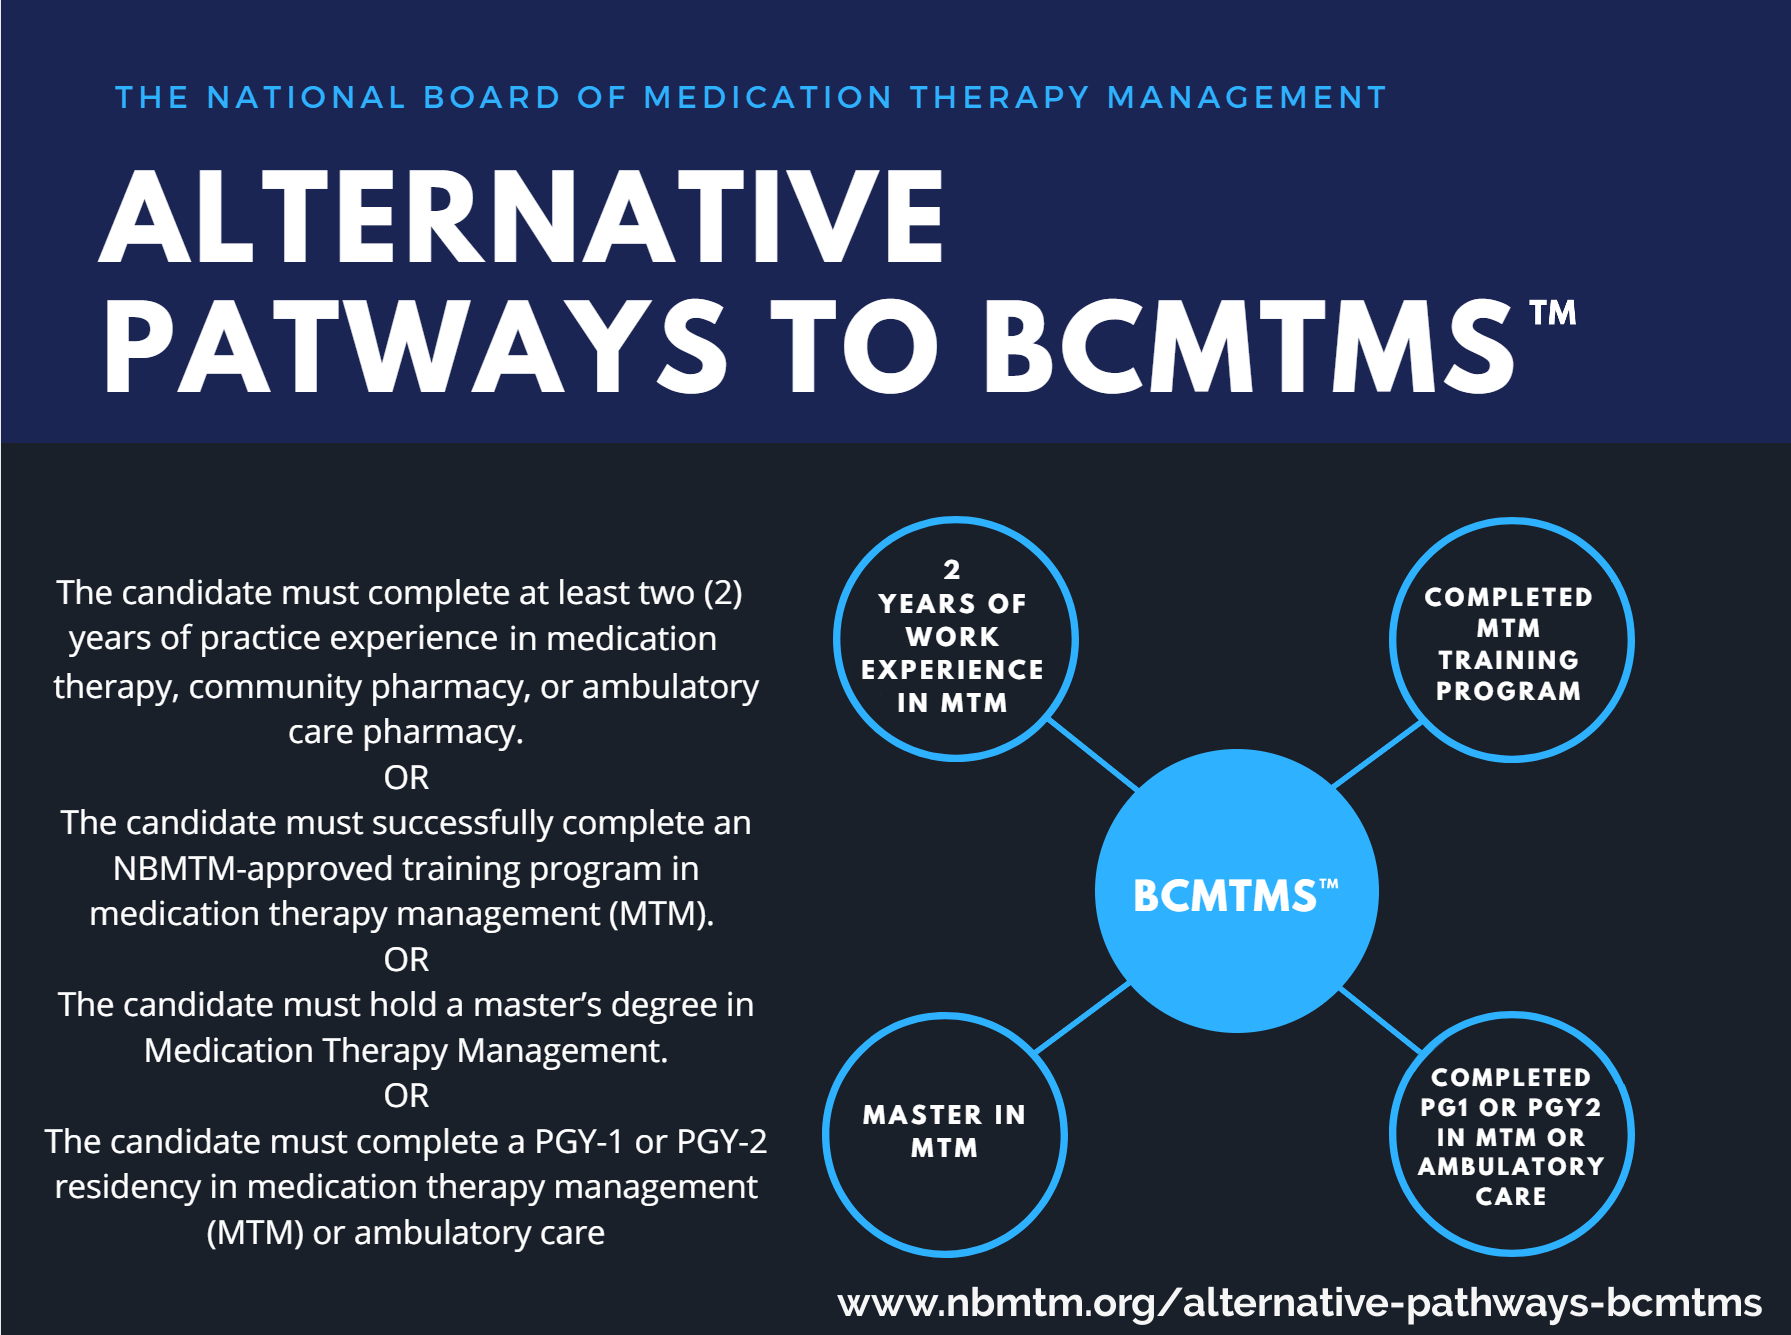 alternative-pathways-to-bcmtms-national-board-of-medication-therapy